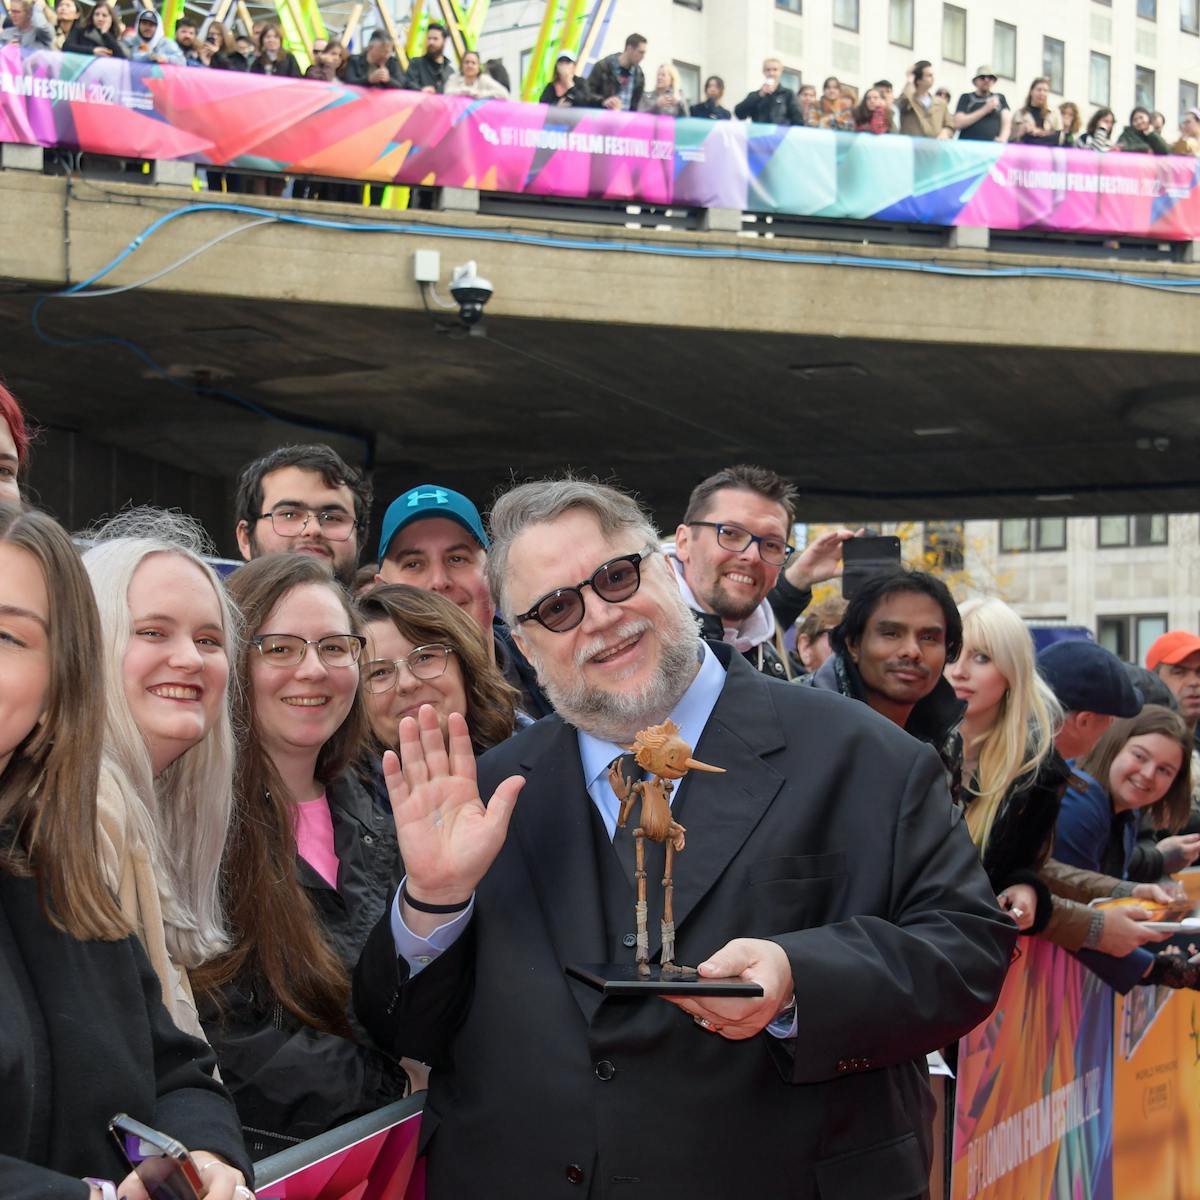 Guillermo del Toro and his Pinocchio puppet greet fans at the BFI London Film Festival.